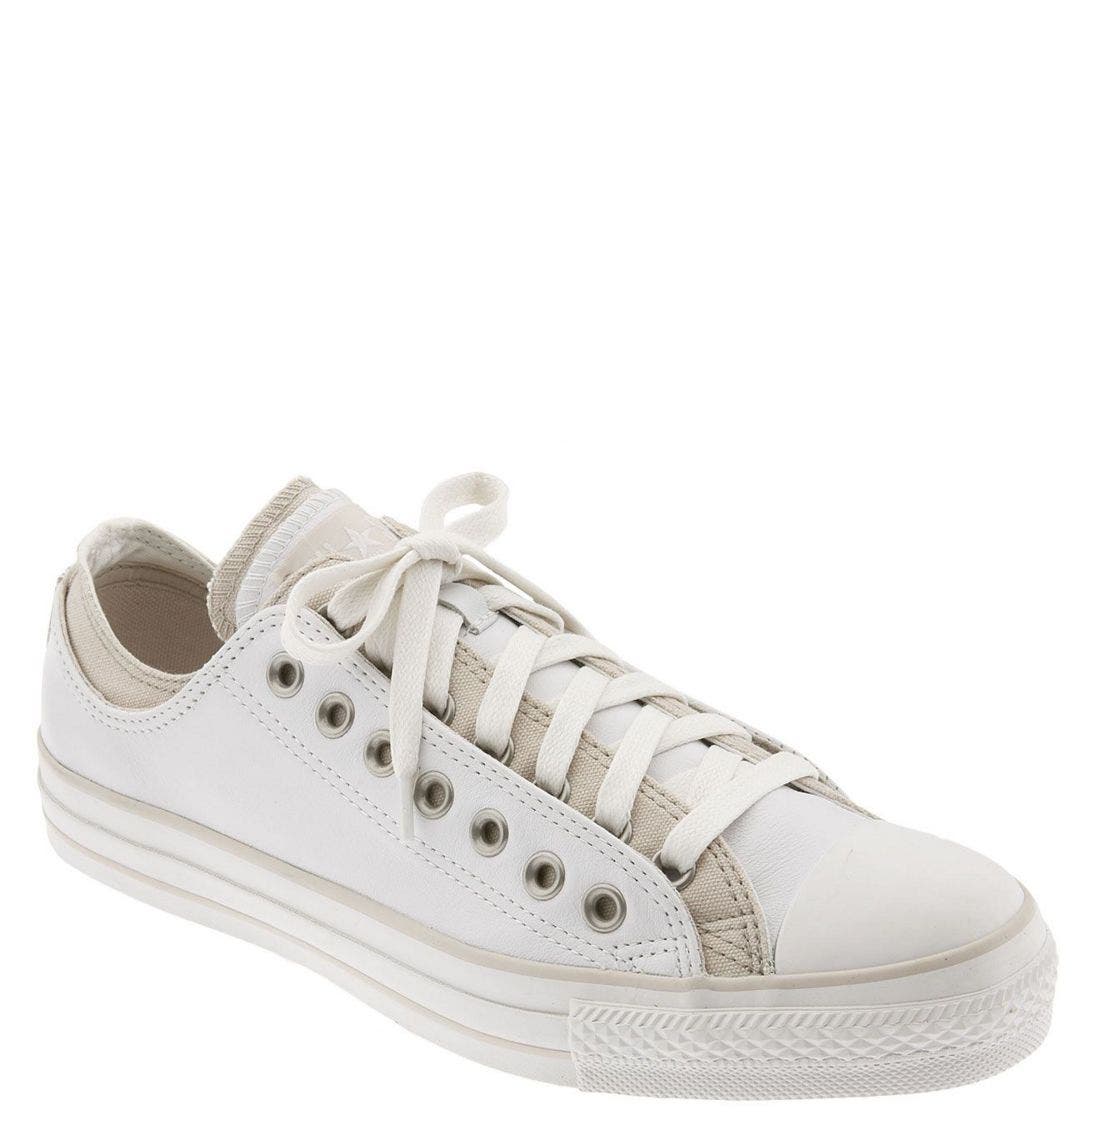 double layer converse shoes